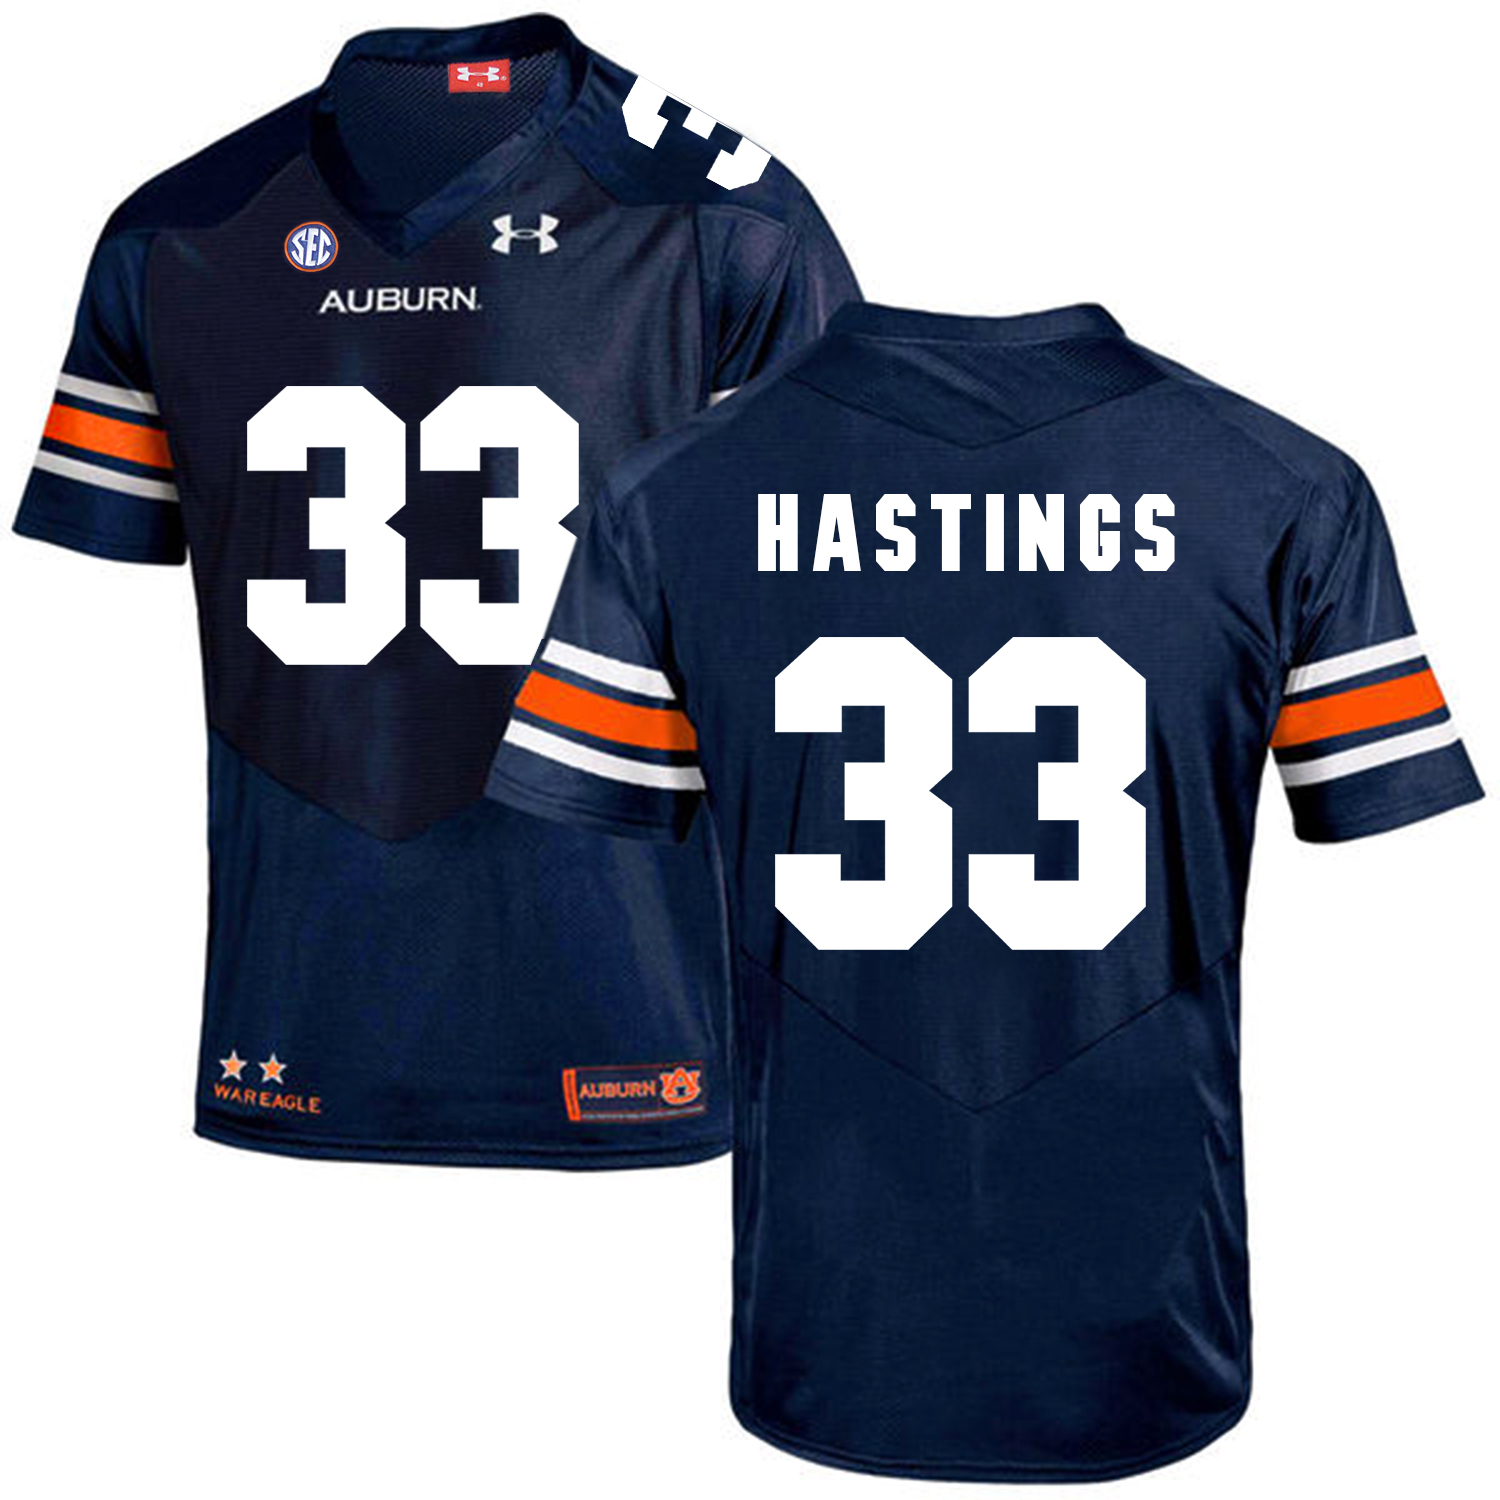 Auburn Tigers 33 Will Hastings Navy College Football Jersey